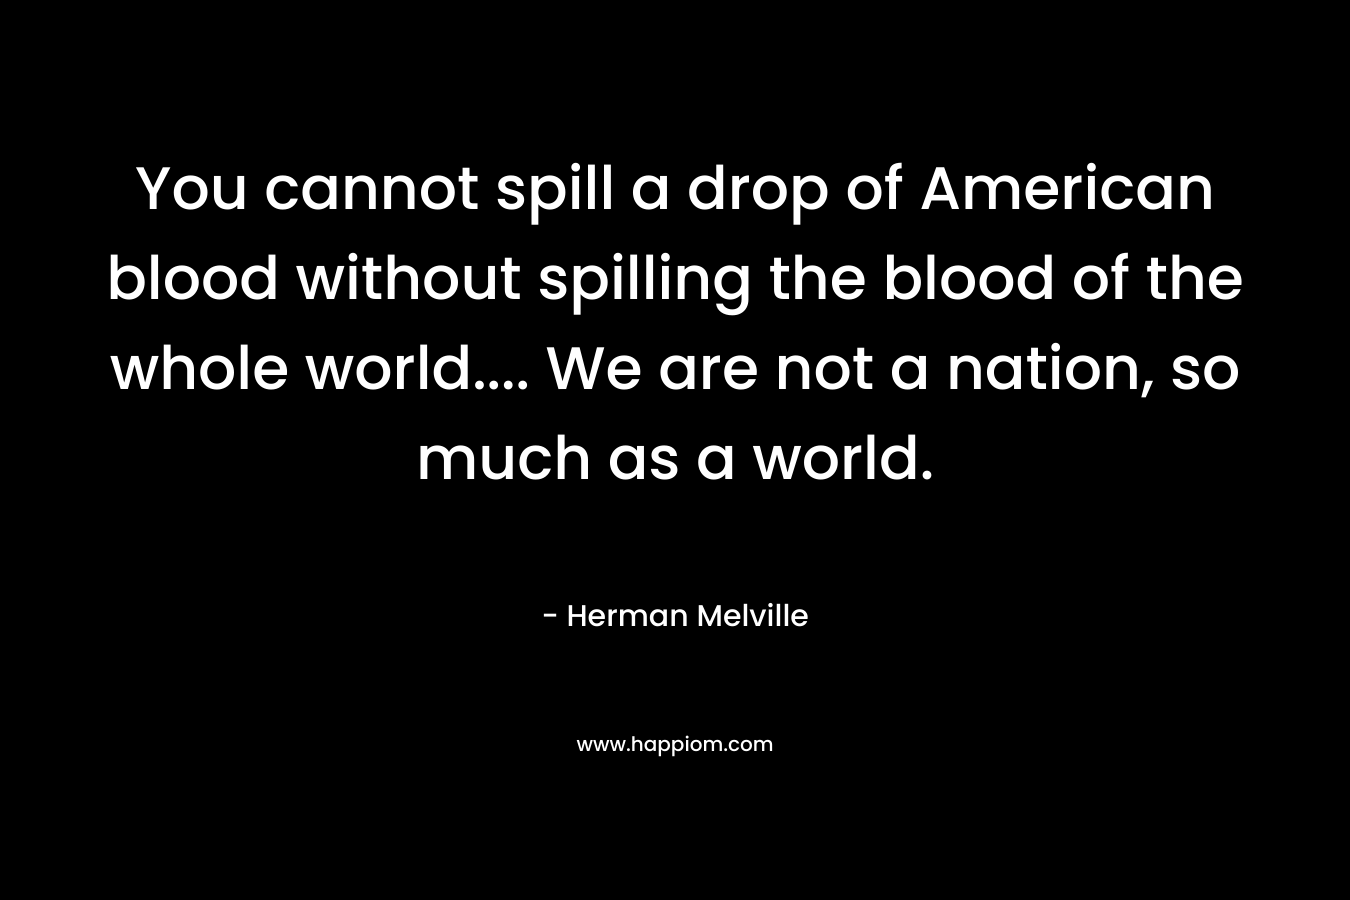 You cannot spill a drop of American blood without spilling the blood of the whole world.... We are not a nation, so much as a world.